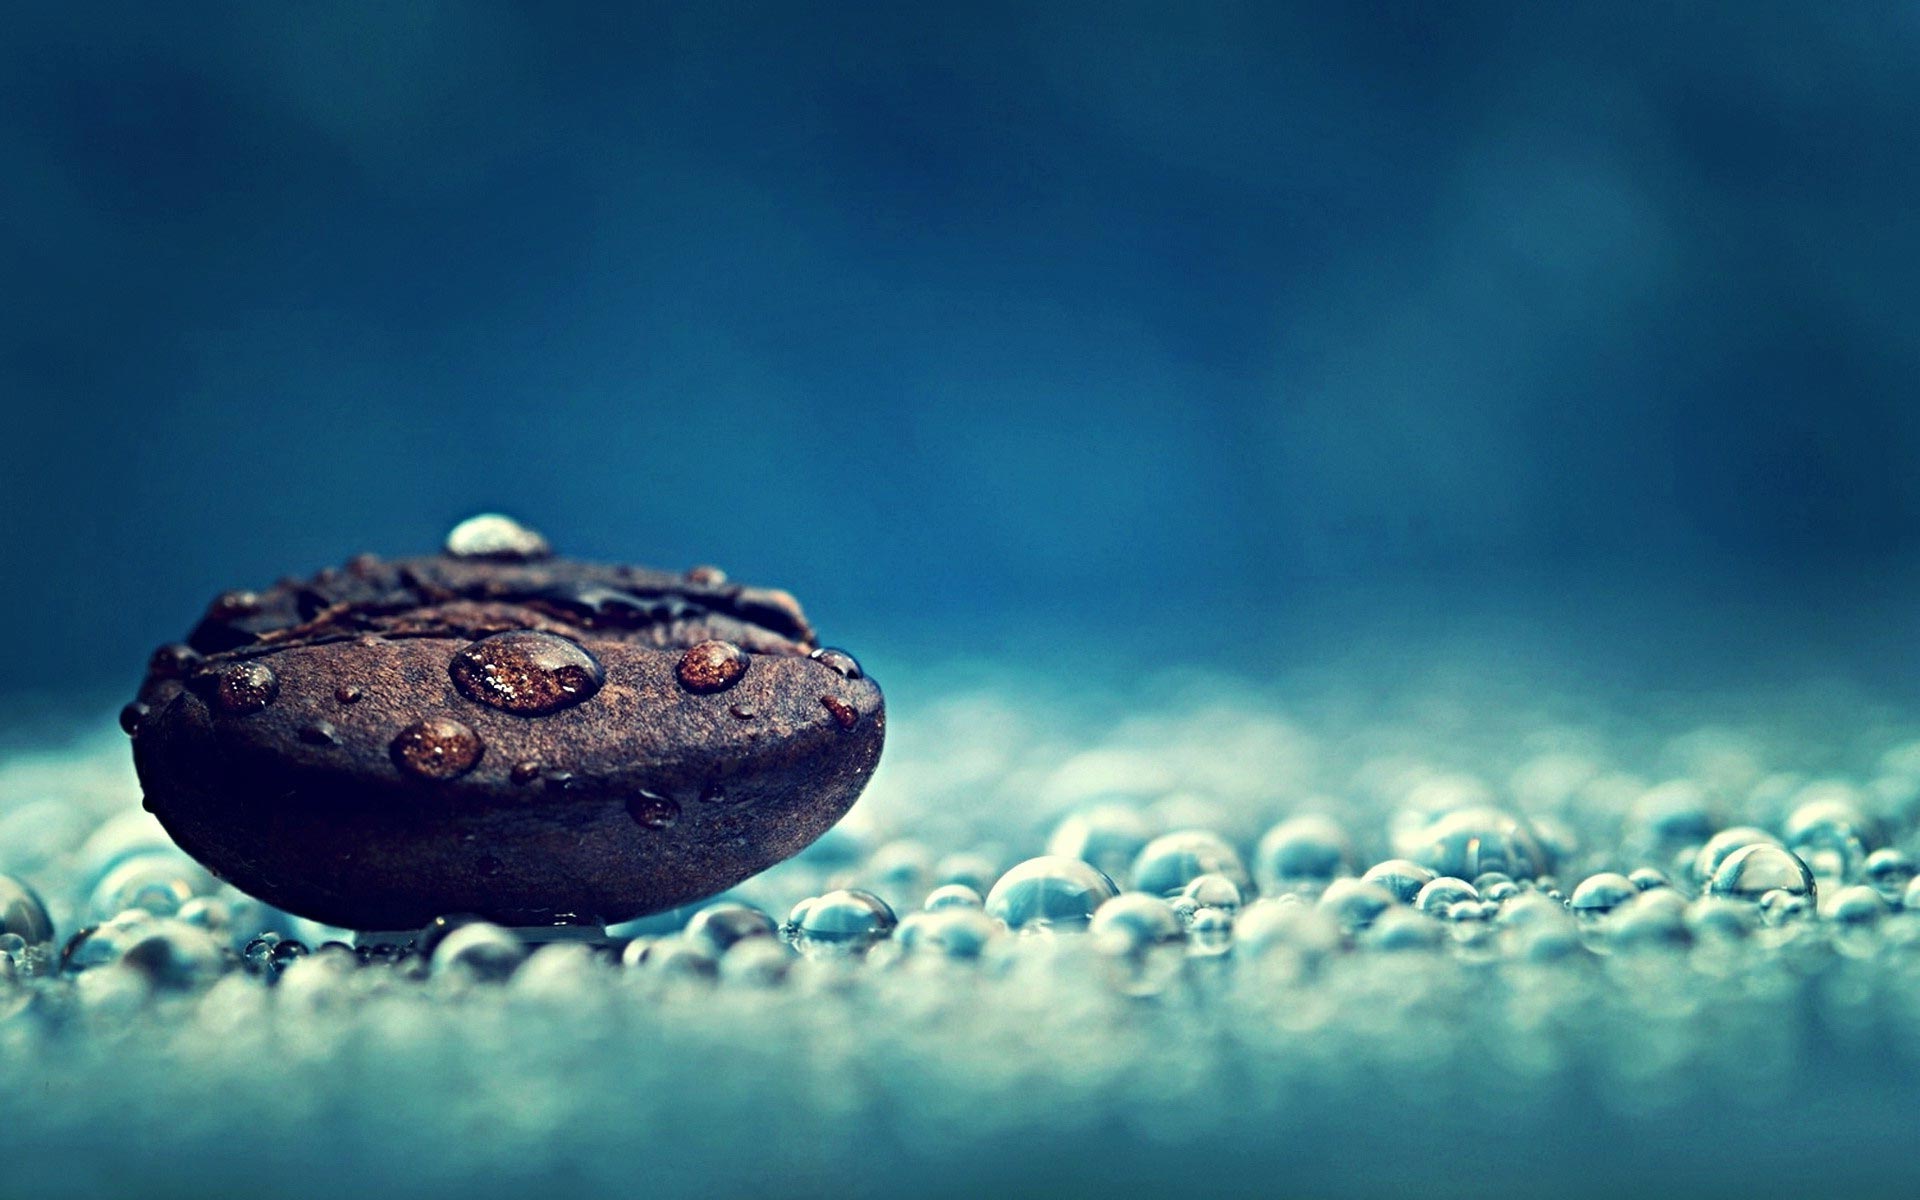 Water Drops On A Rock Wallpapers HD 1920x1200